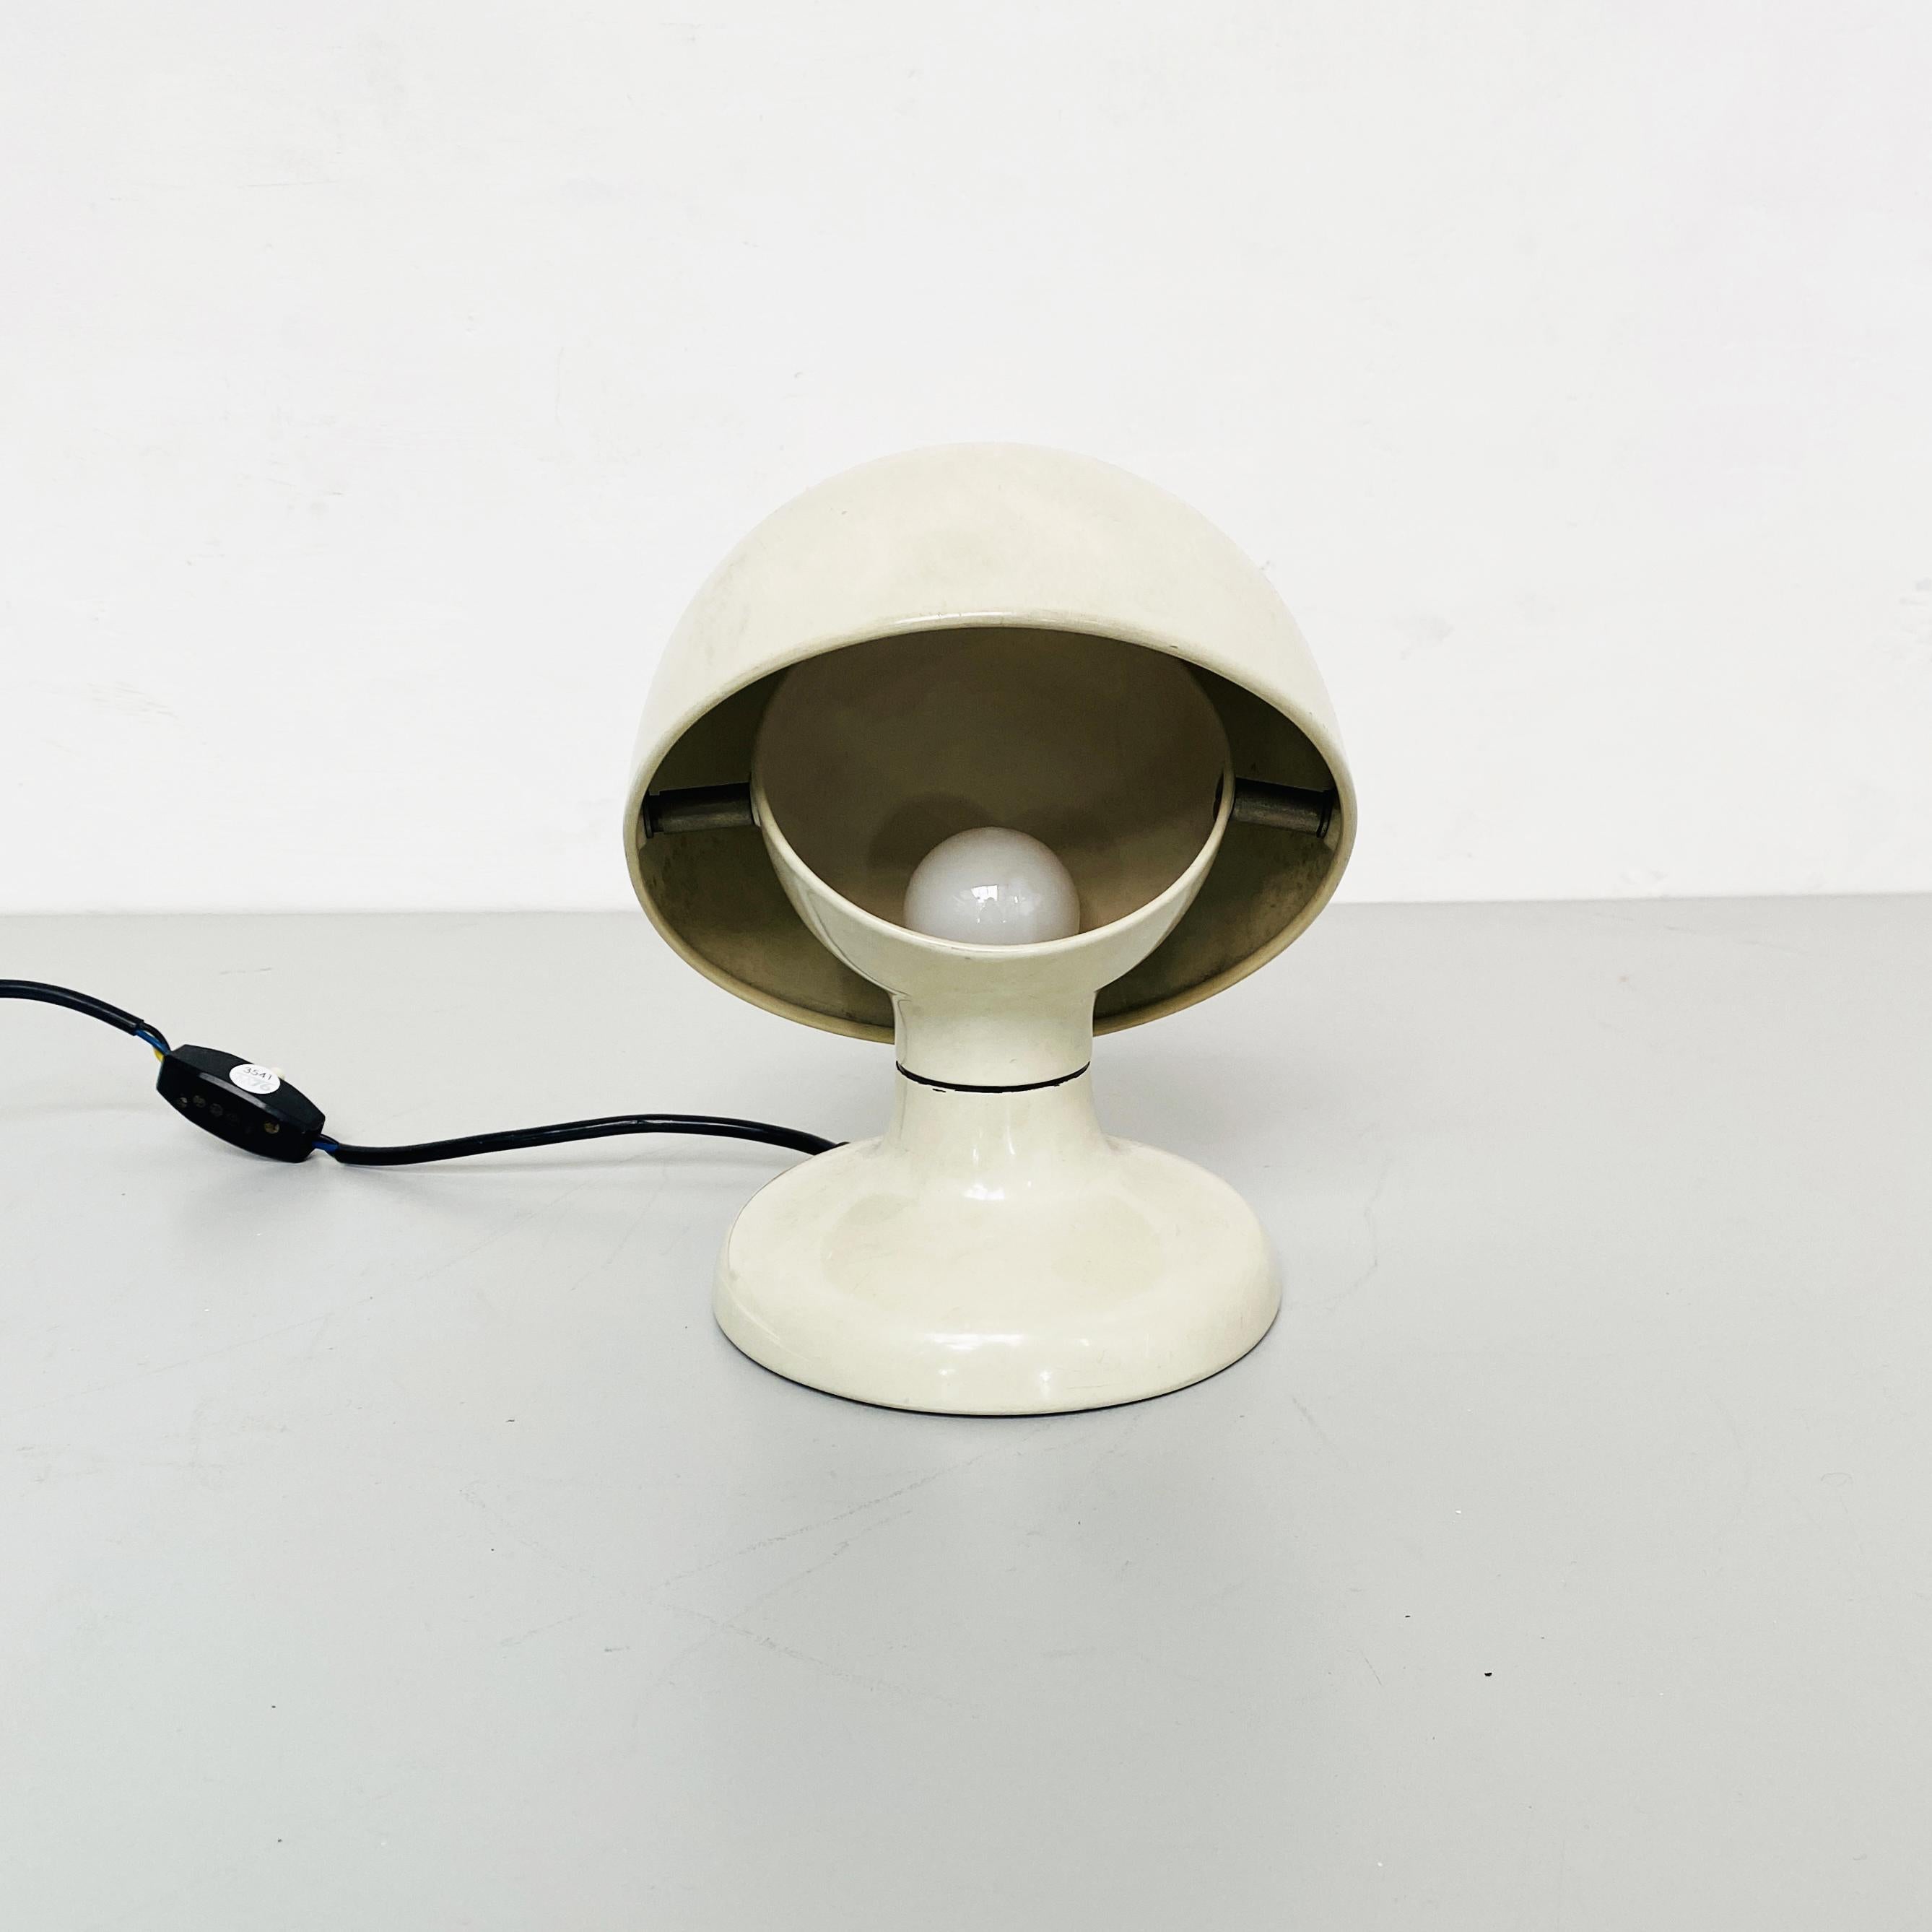 Italian mid-century white metal Jucker table lamp by Tobia Scarpa for Flos, 1963
Jucker adjustable table lamps in white metal. 

Produced by Flos in 1963 on a project by Tobia Scarpa.
Tobia Scarpa it is an important Italian designer famous for the